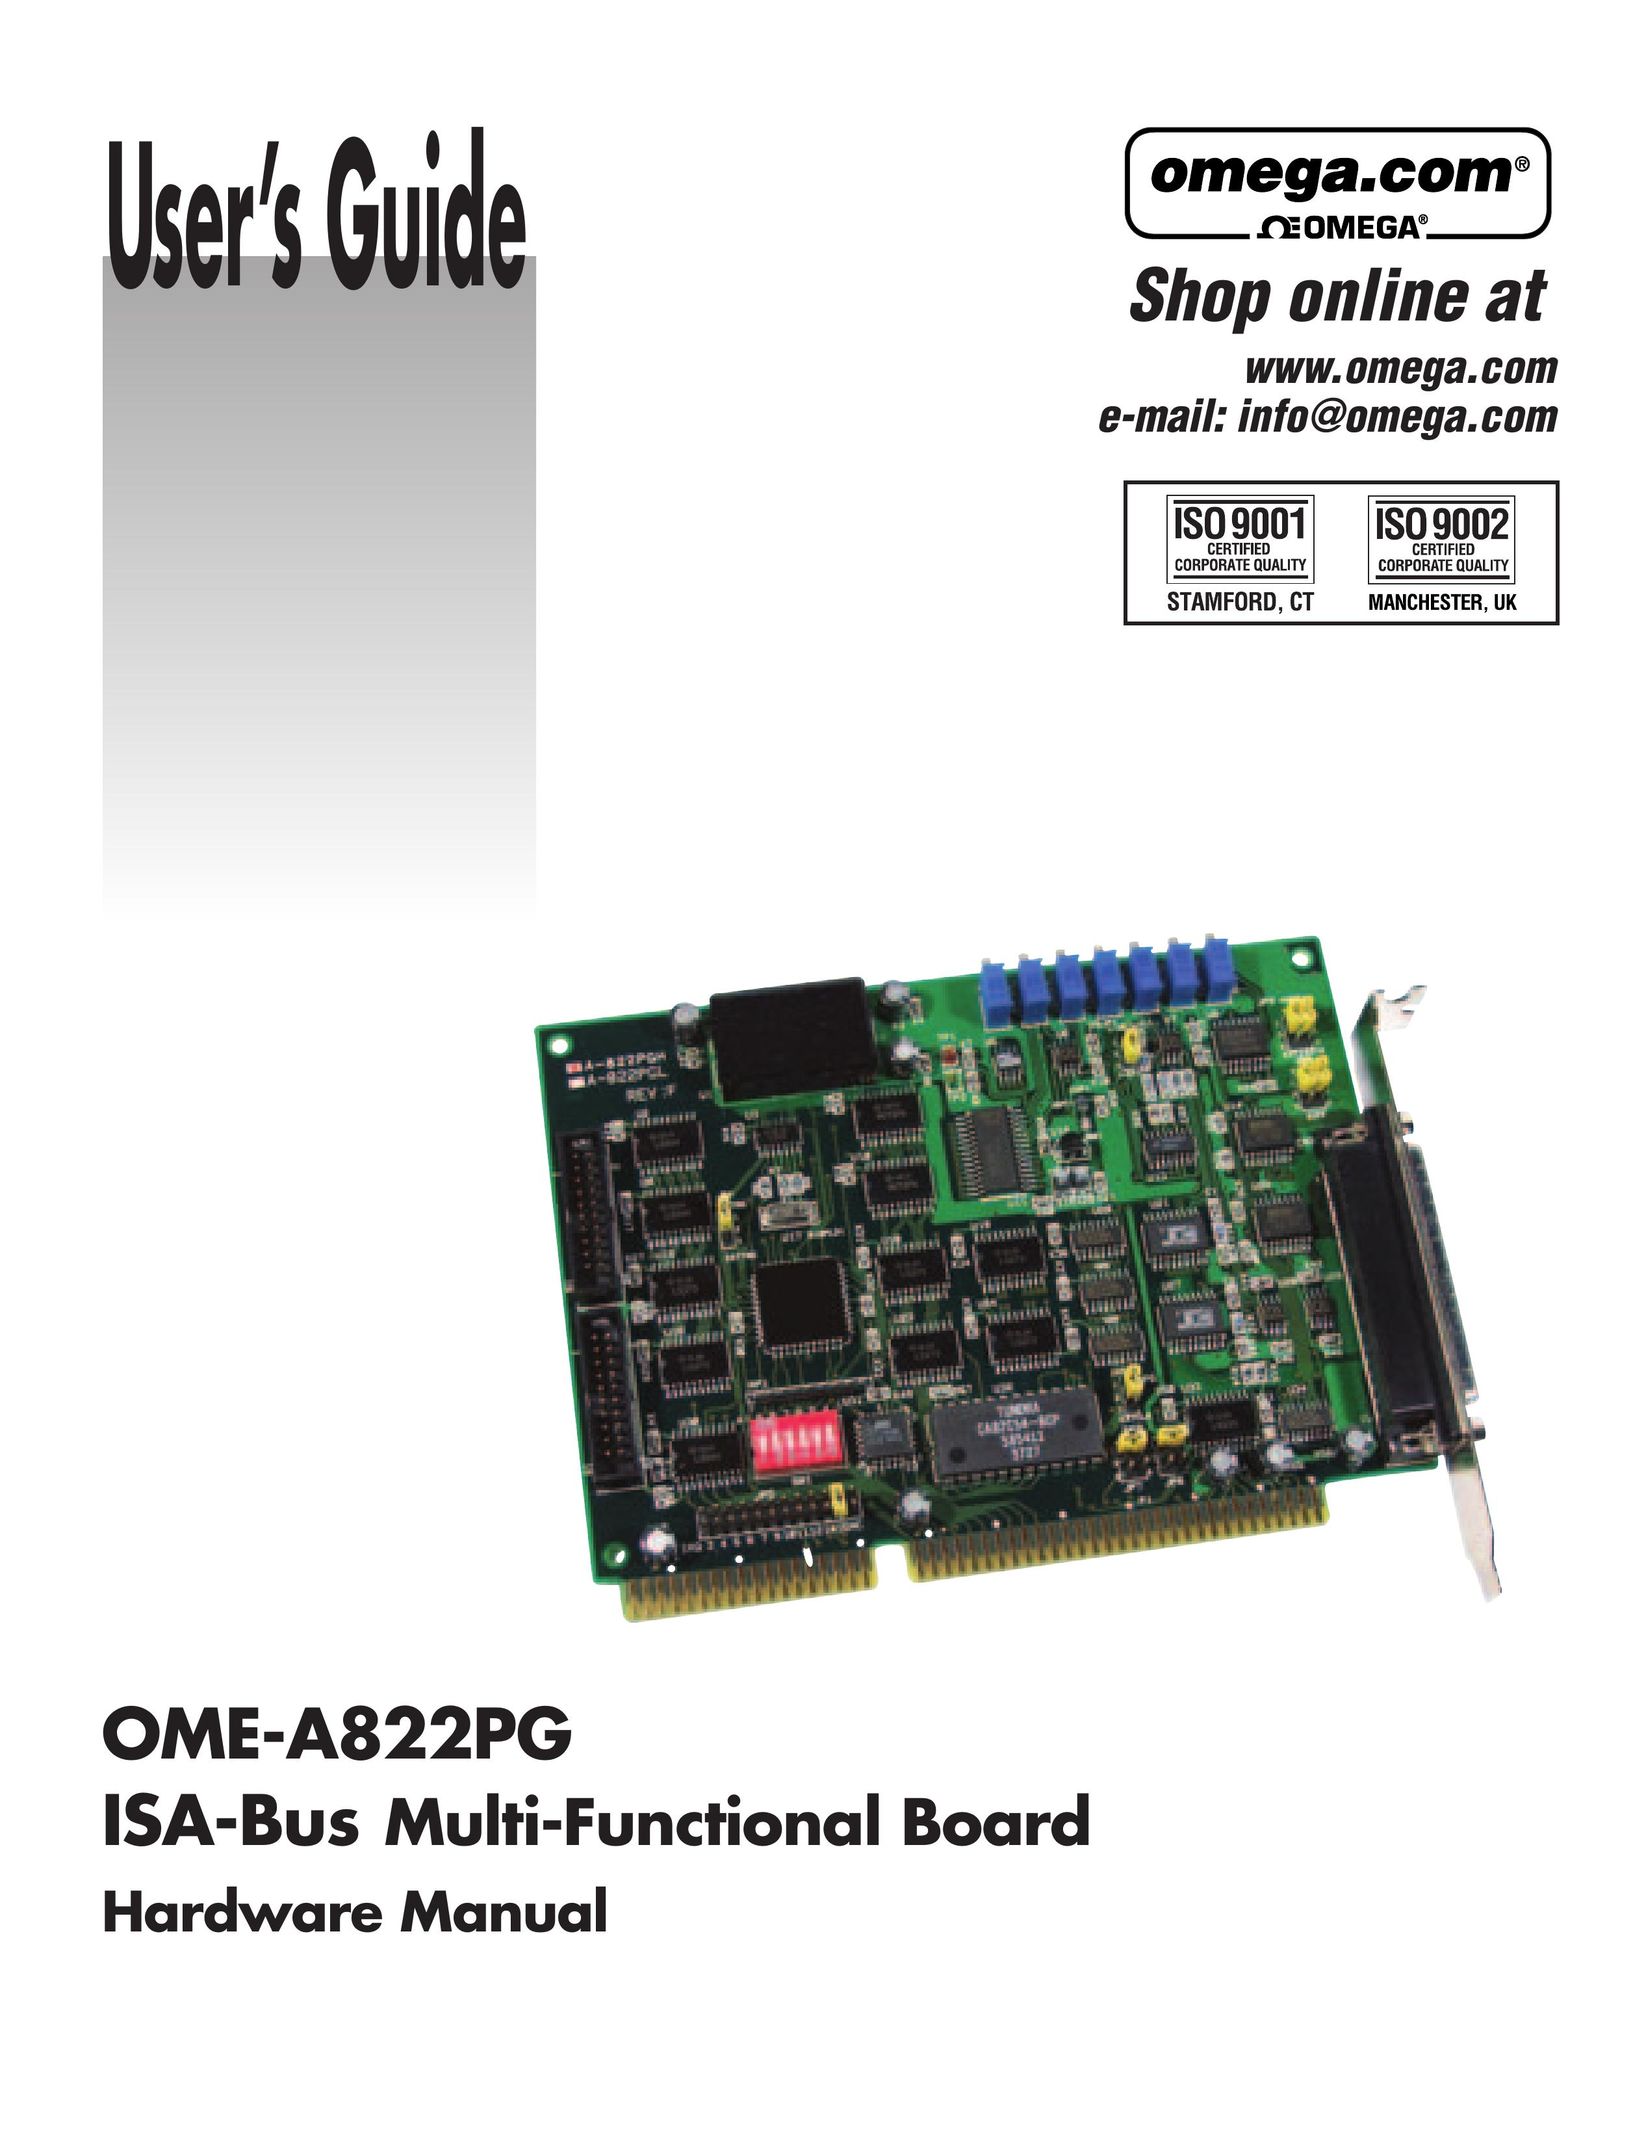 Omega OME-A822PG Computer Hardware User Manual